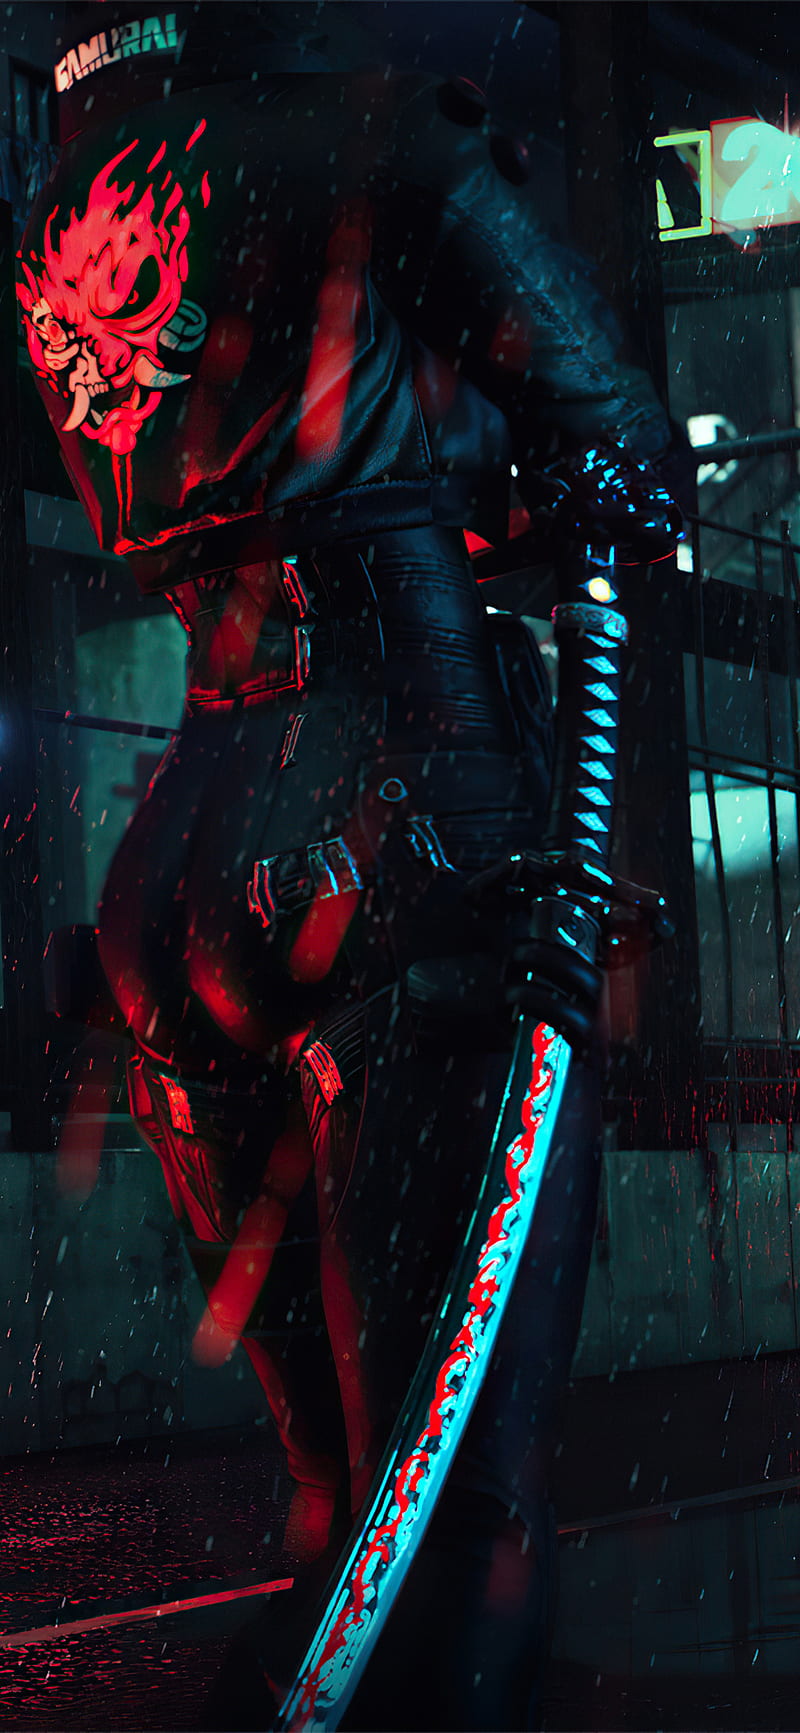 1440x2560 Mobile Wallpaper I made on Photoshop : r/cyberpunkgame